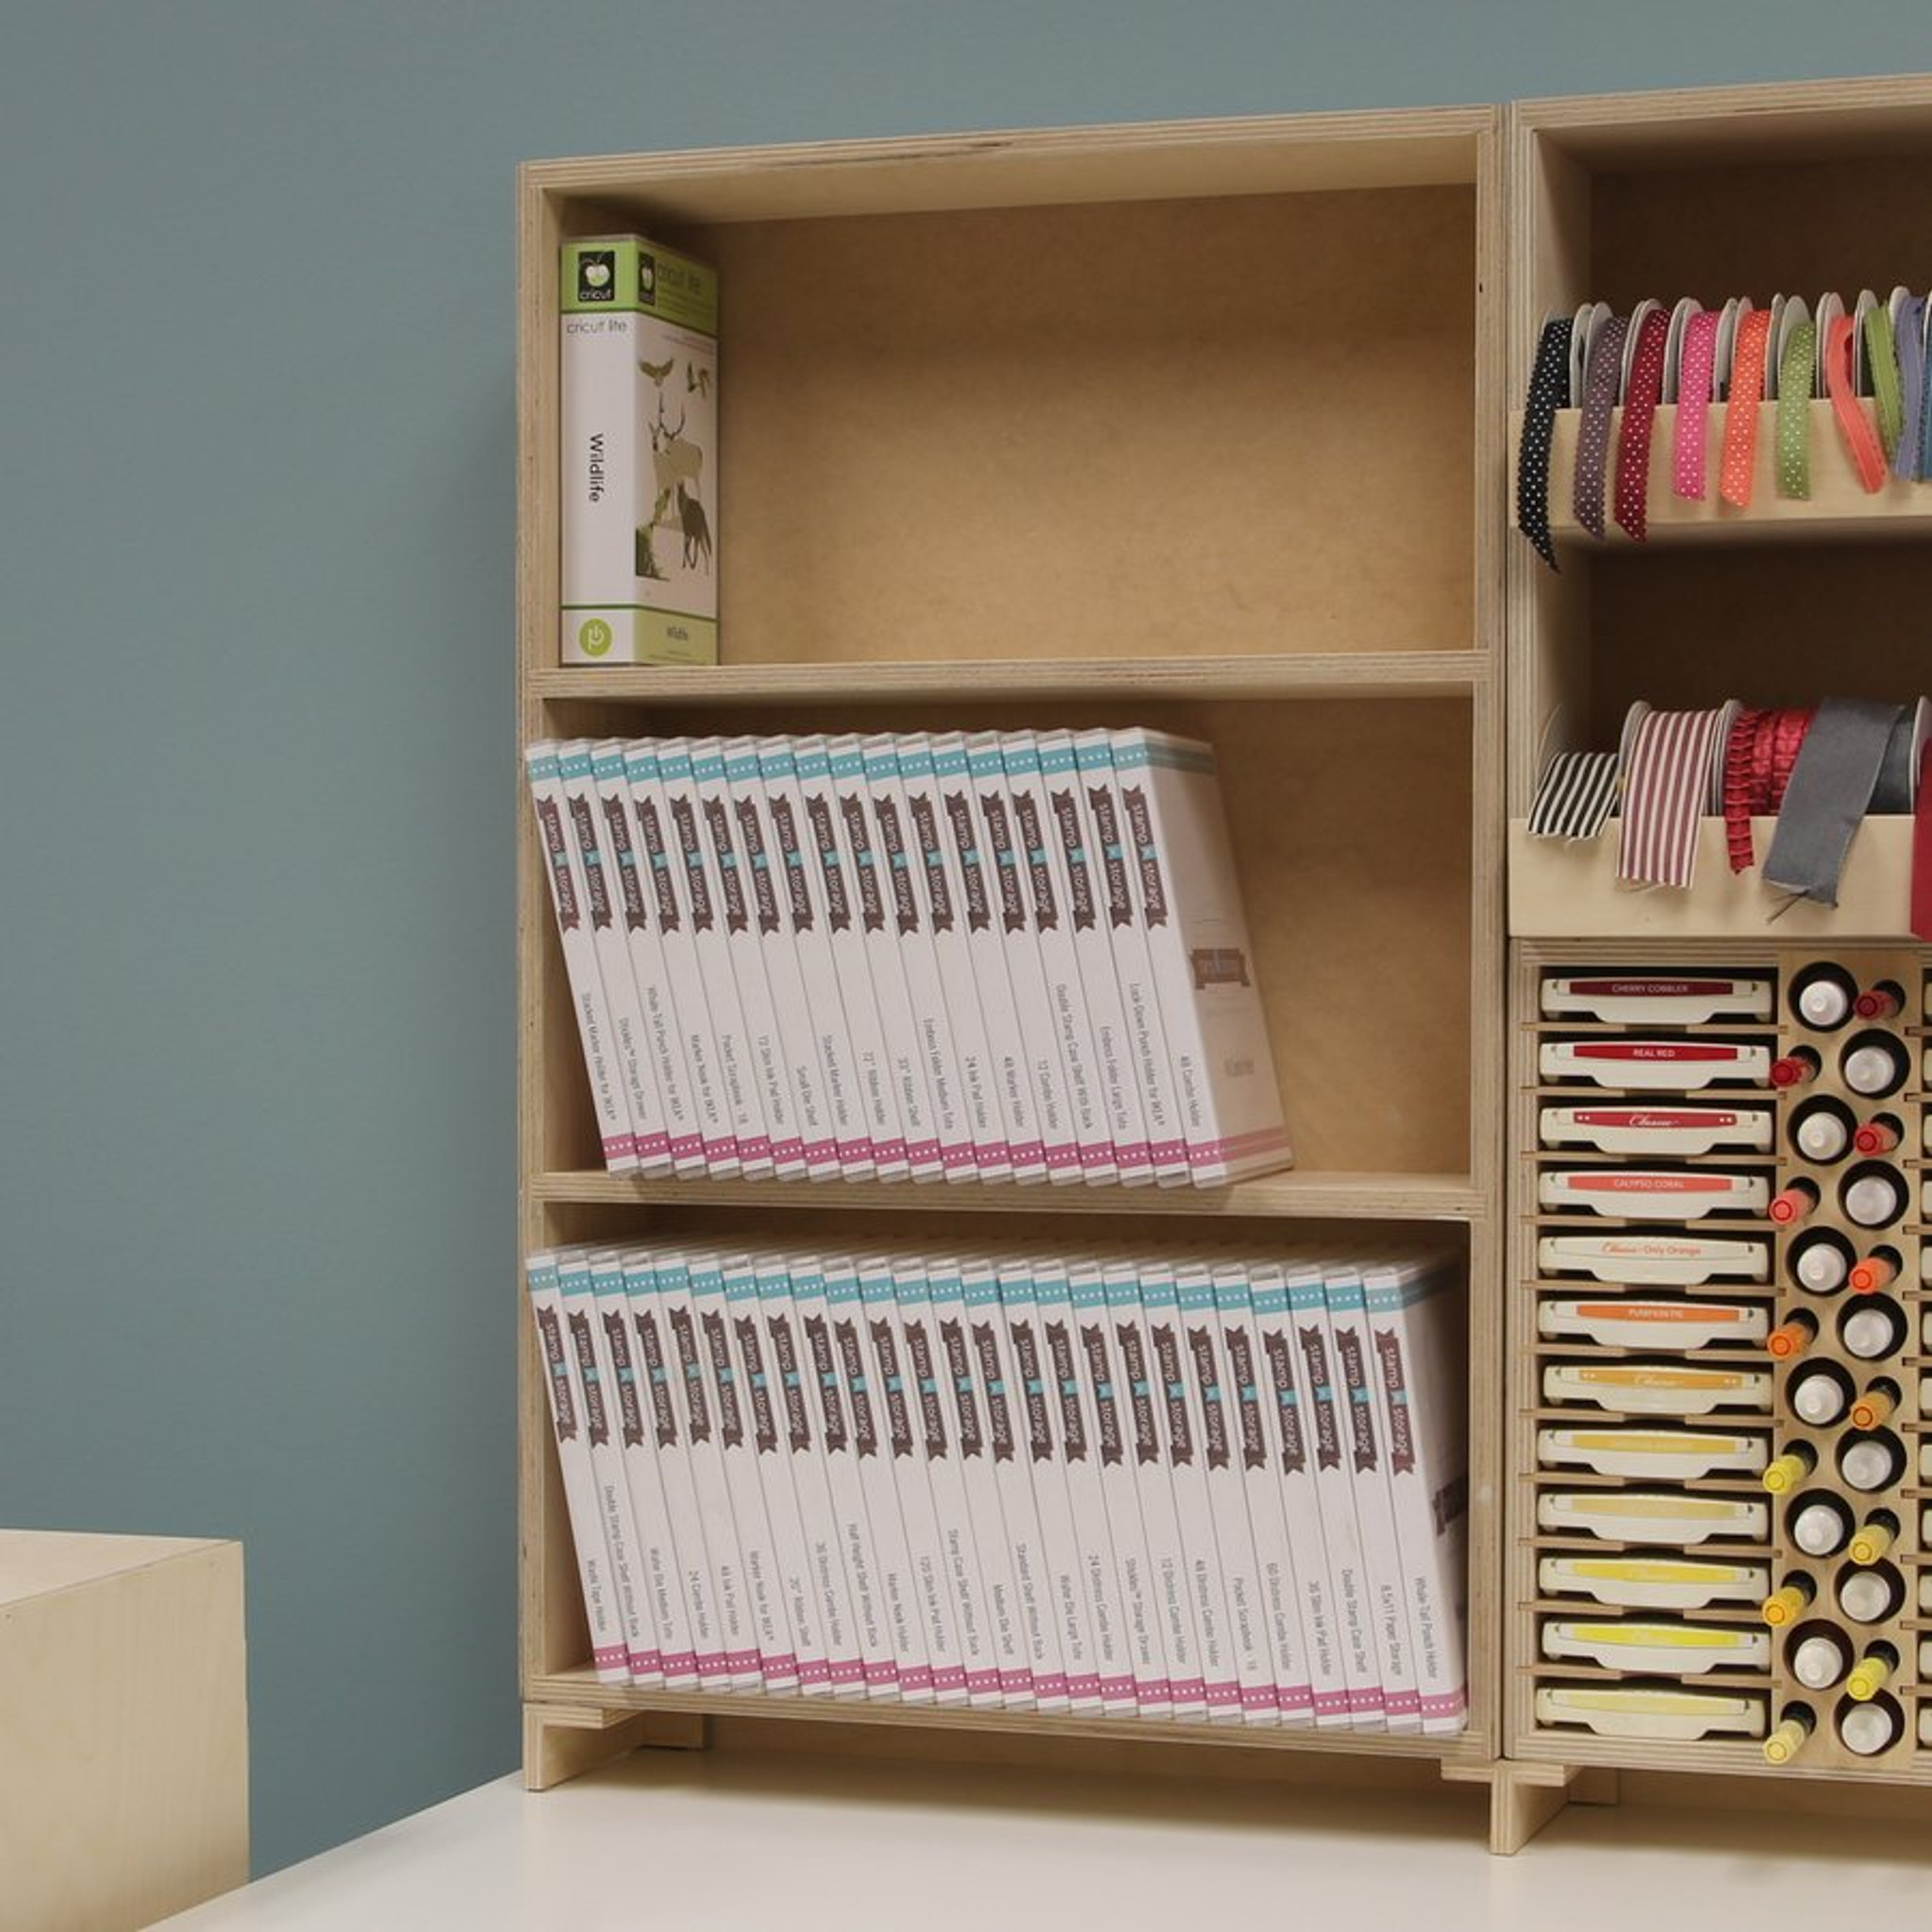 Organize your Crafting Space with Stamp-n-Storage - Patty Stamps